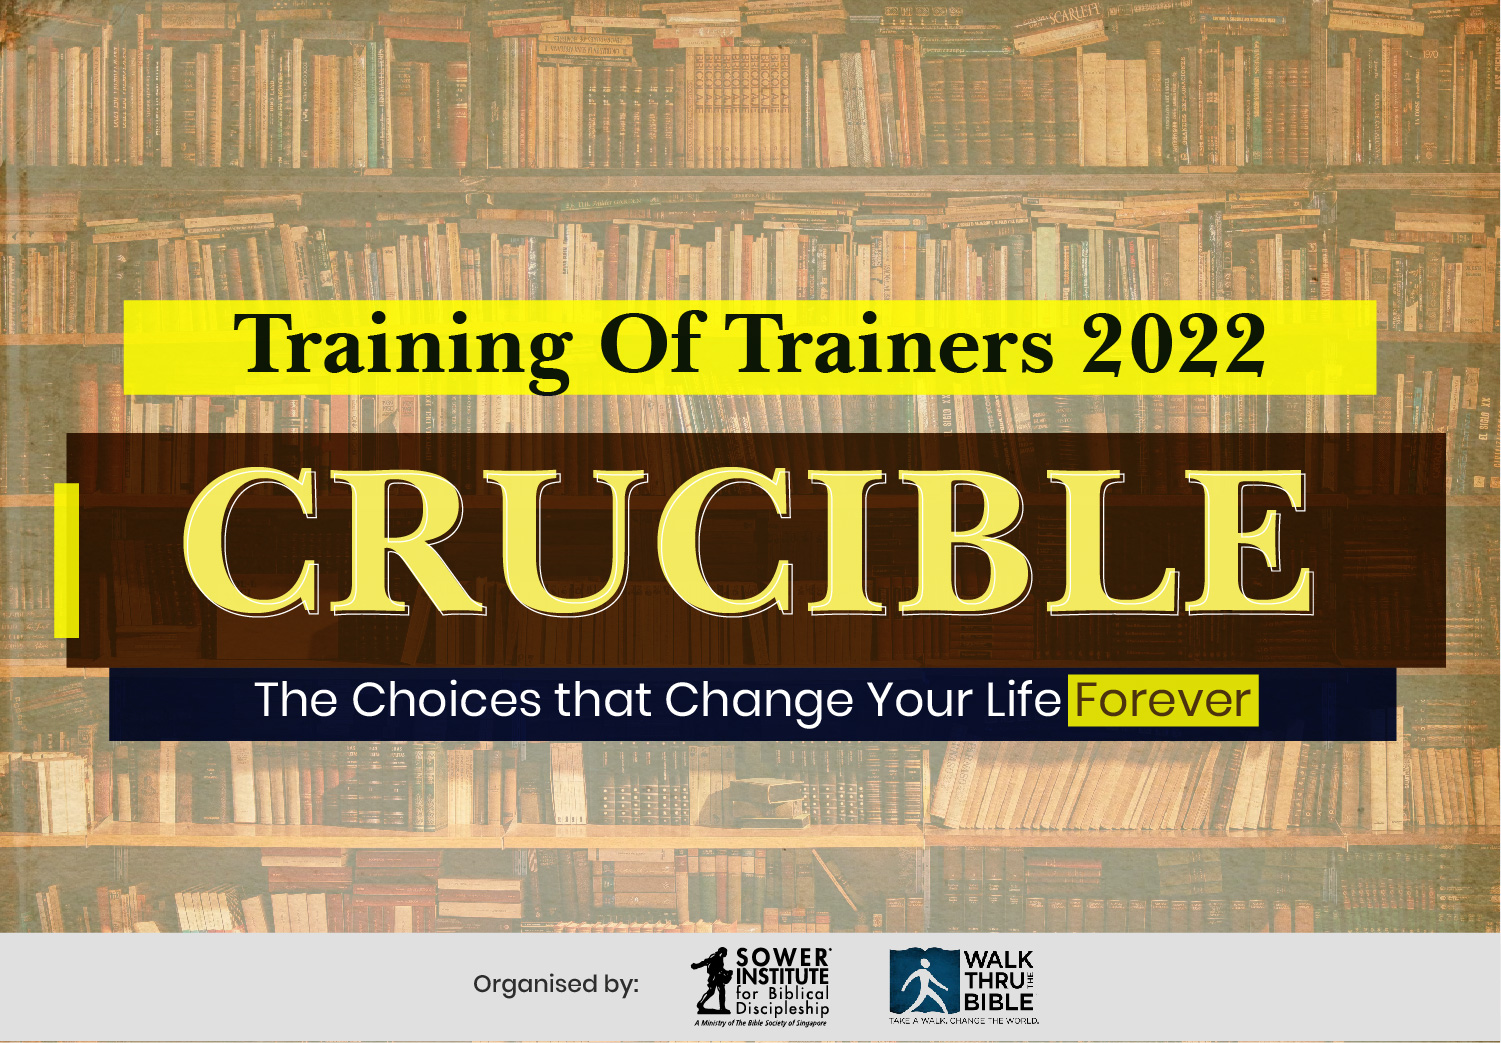 Additional Session of Crucible - Training of Trainers